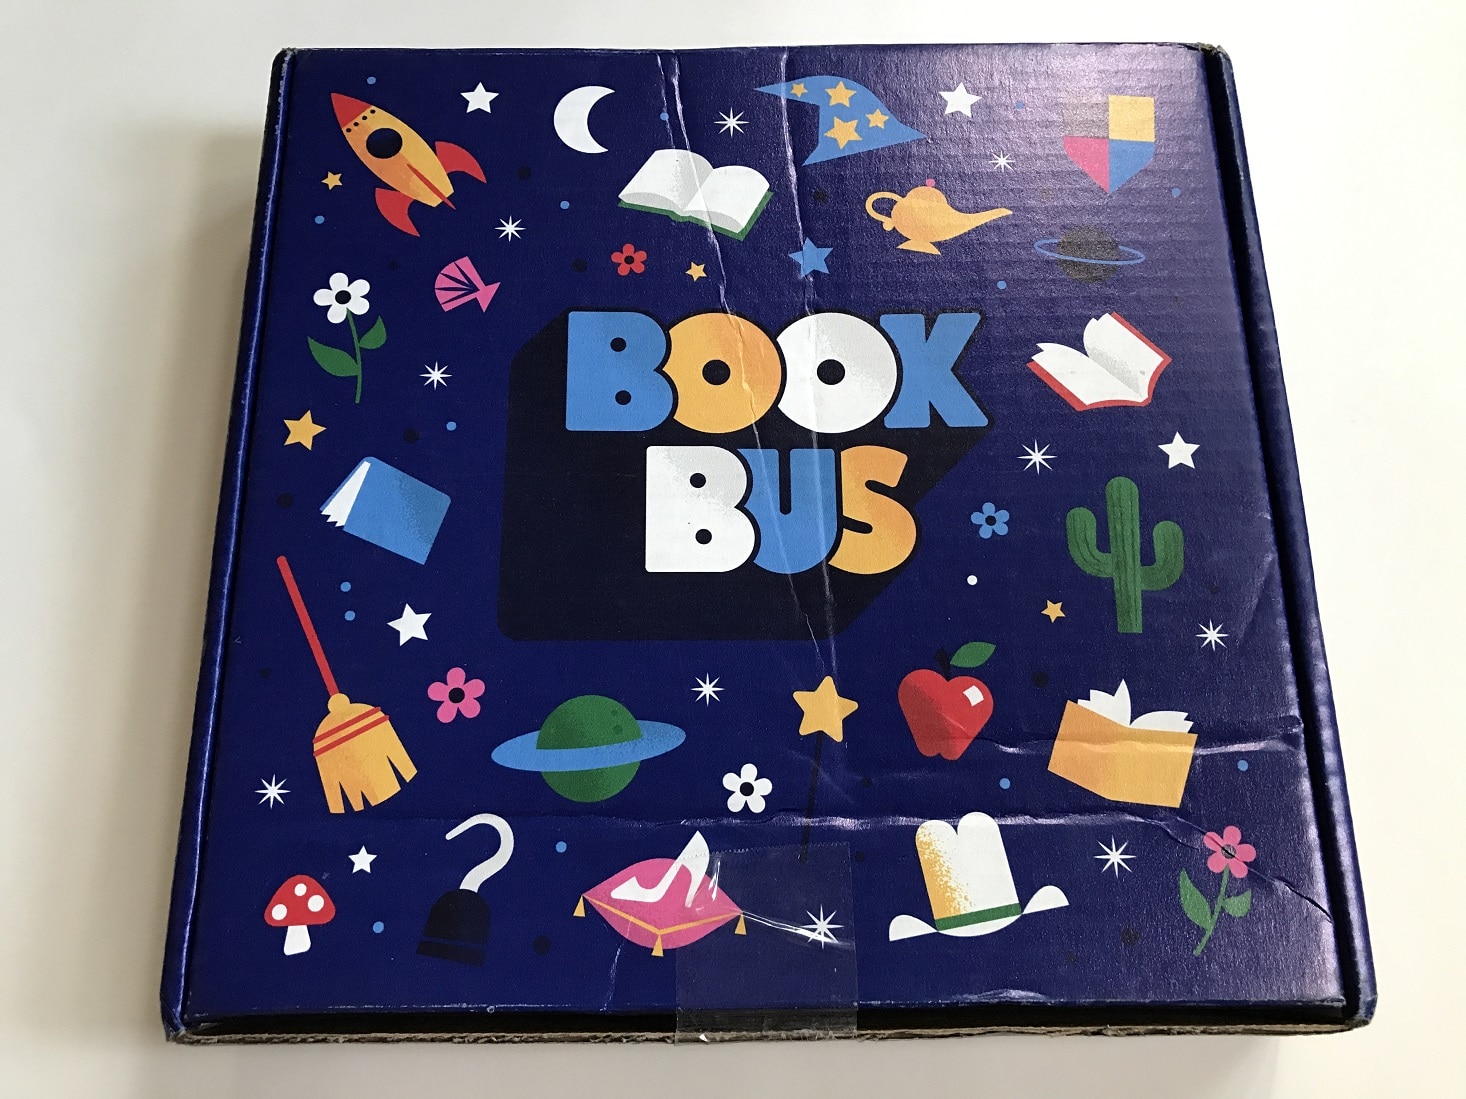 Book Bus Kid’s Subscription Box Review – June 2017